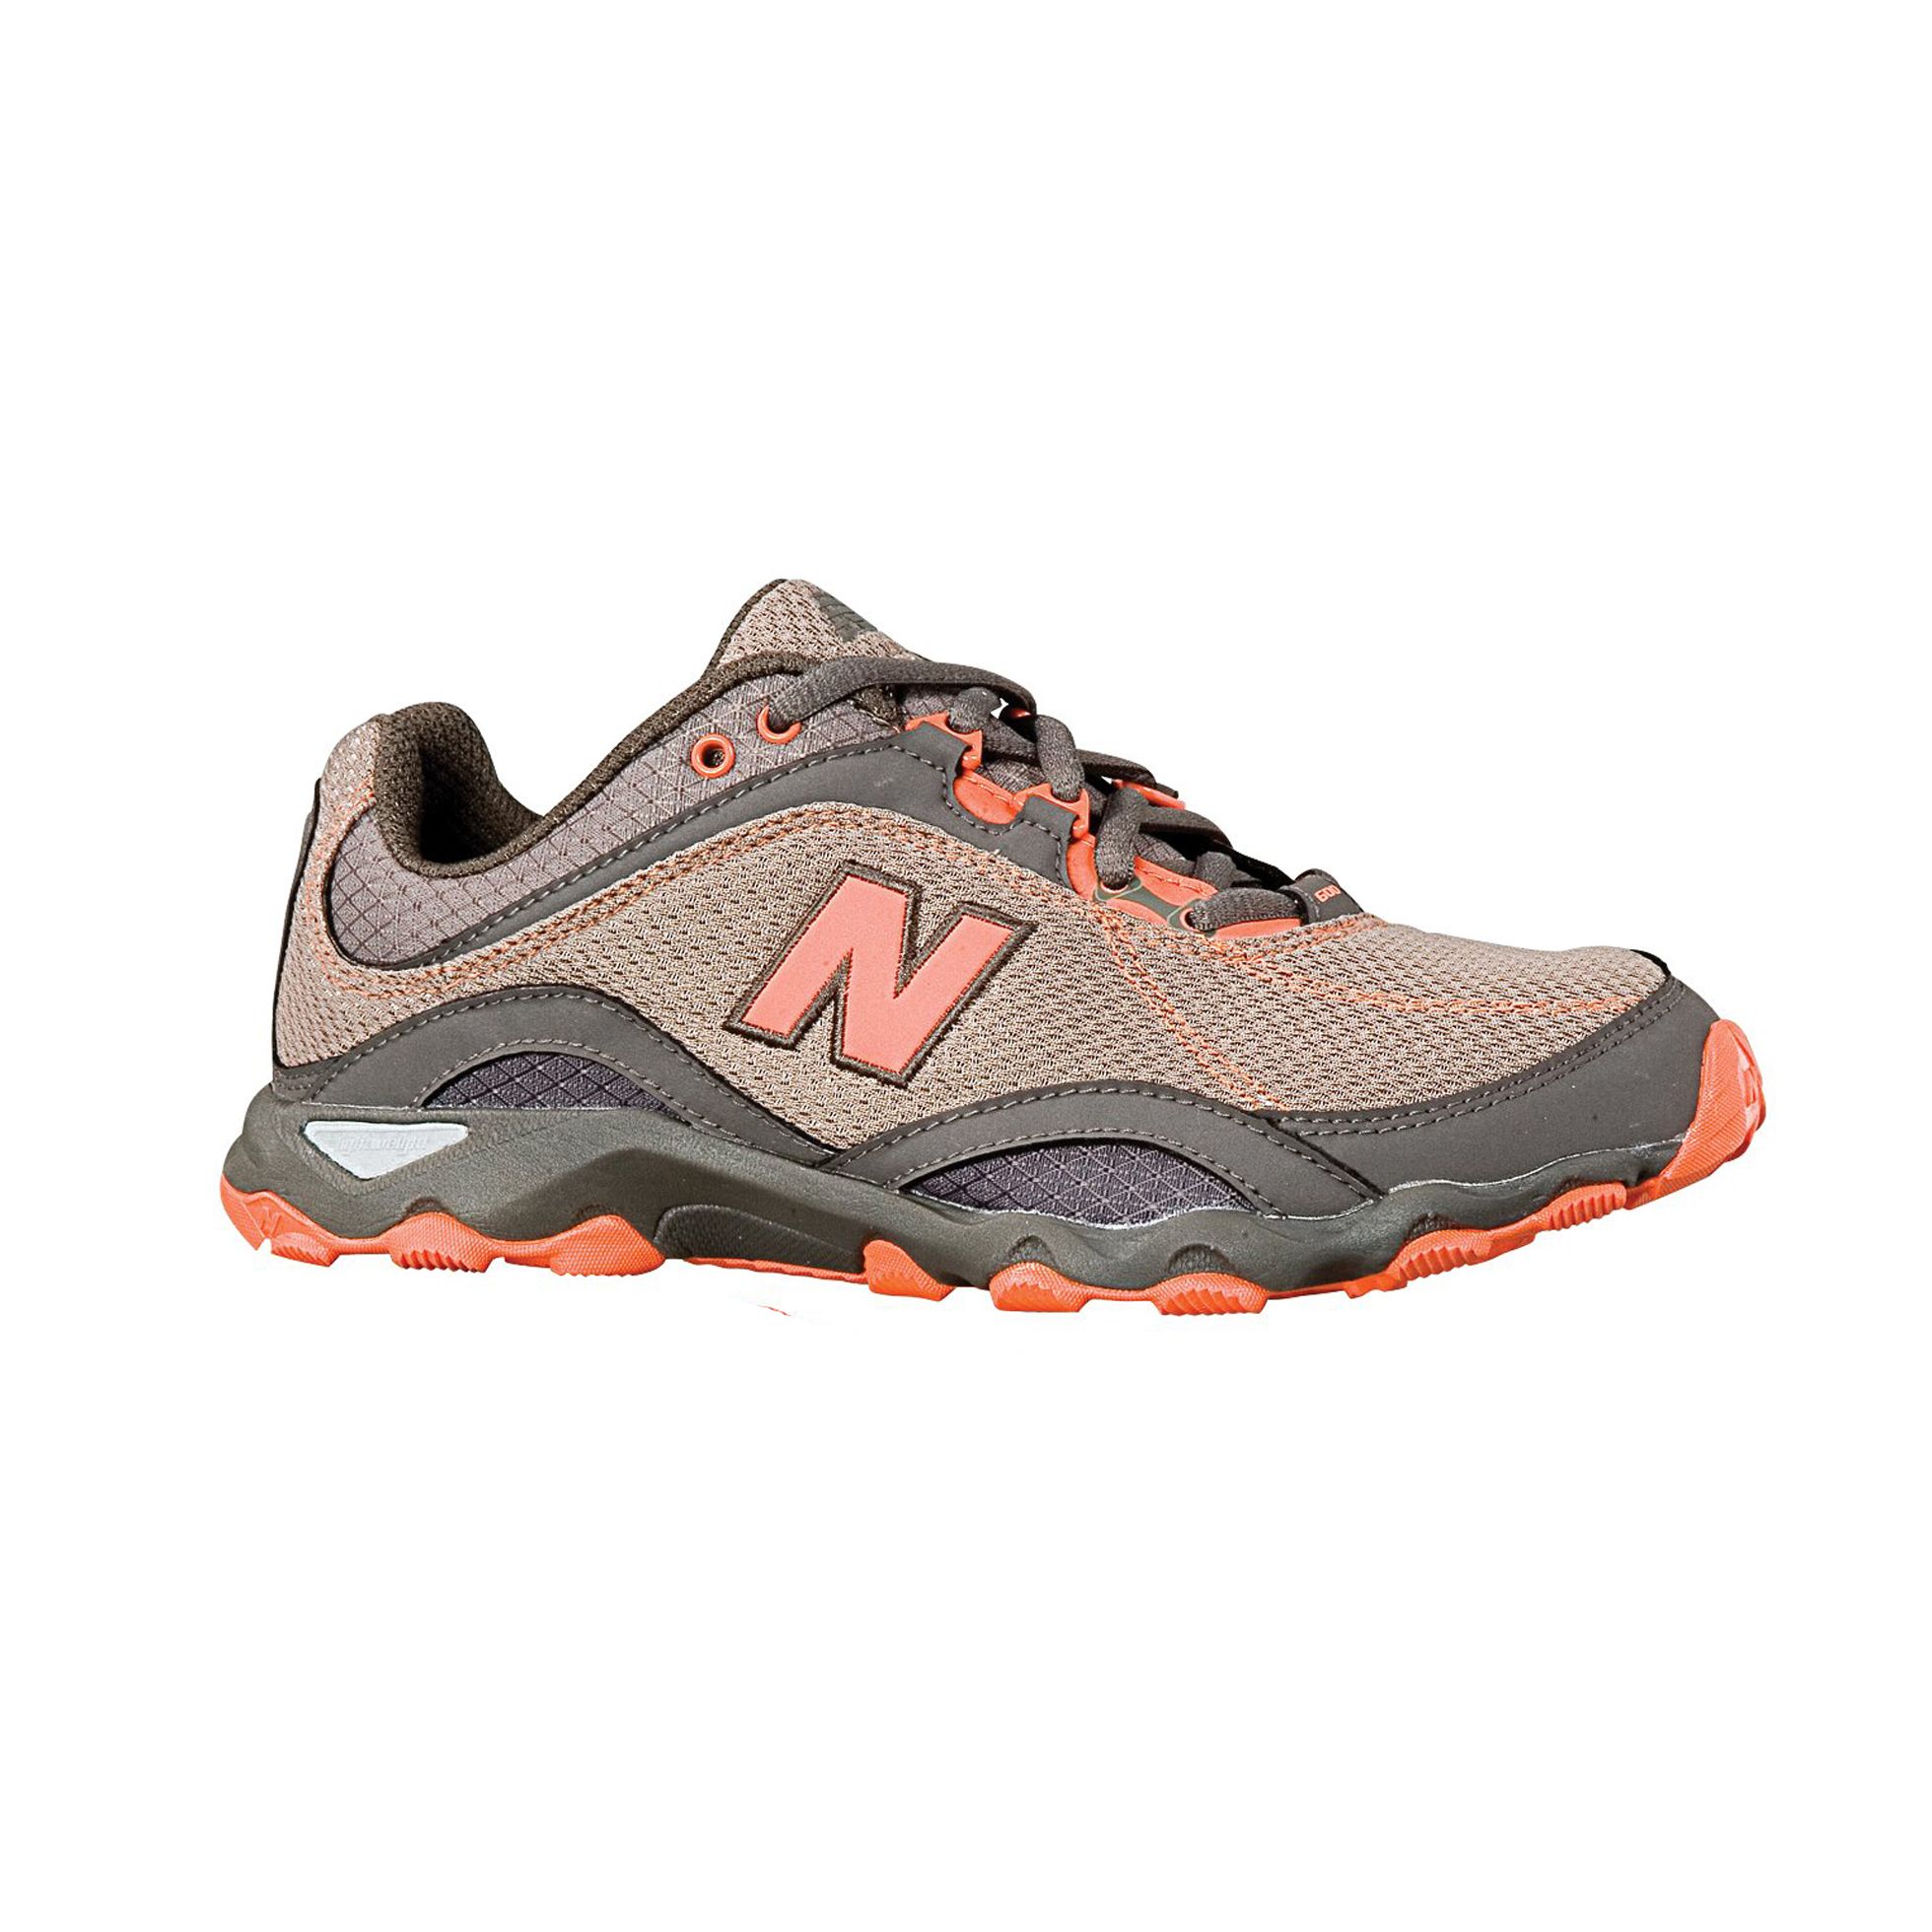 new balance brown tennis shoes